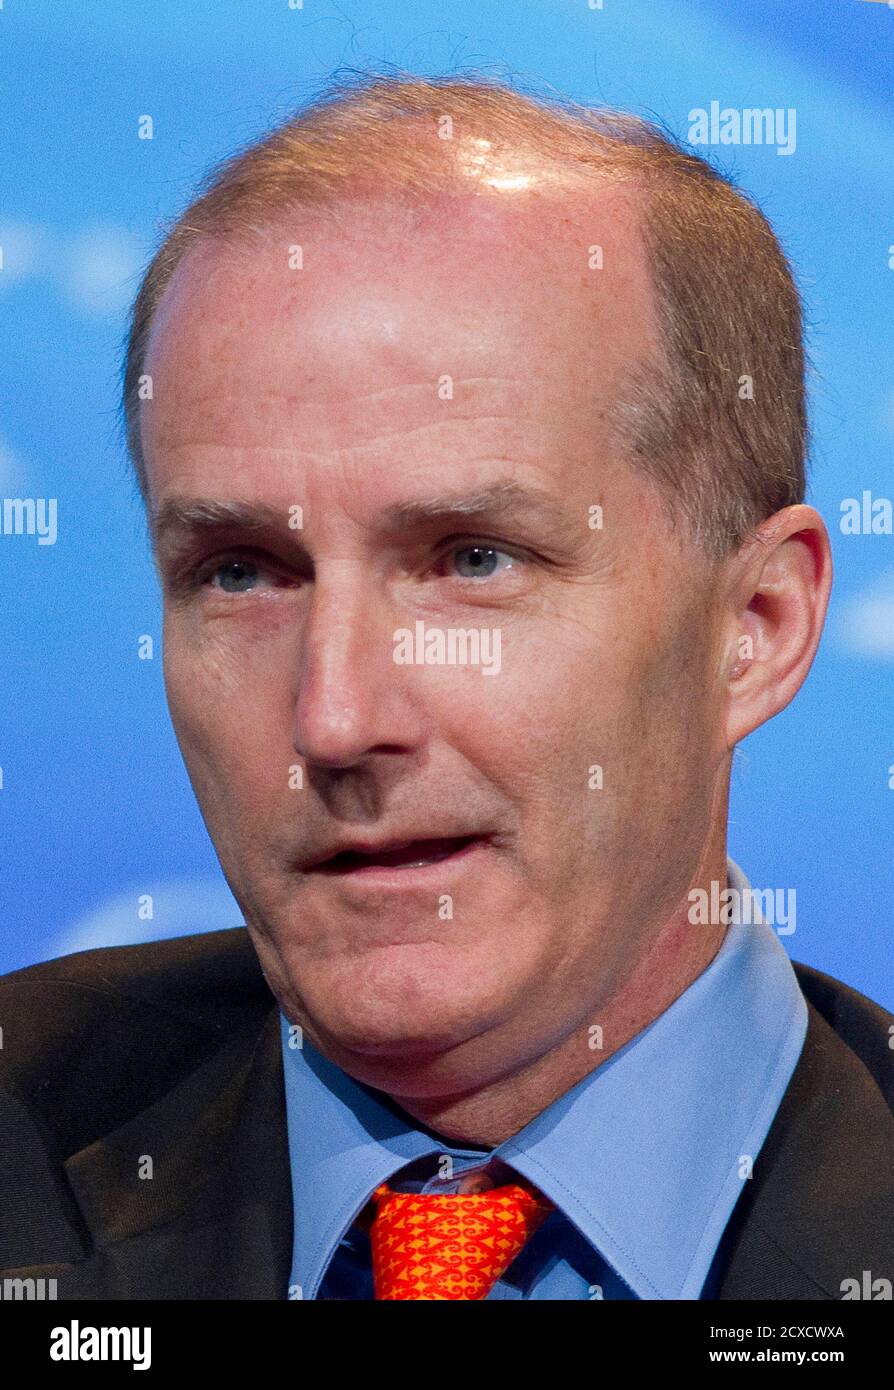 NRG Energy President and CEO David Crane speaks during the CERAWEEK world petrochemical conference in Houston March 8, 2012.  REUTERS/Richard Carson    (UNITED STATES - Tags: BUSINESS ENERGY HEADSHOT) Stock Photo